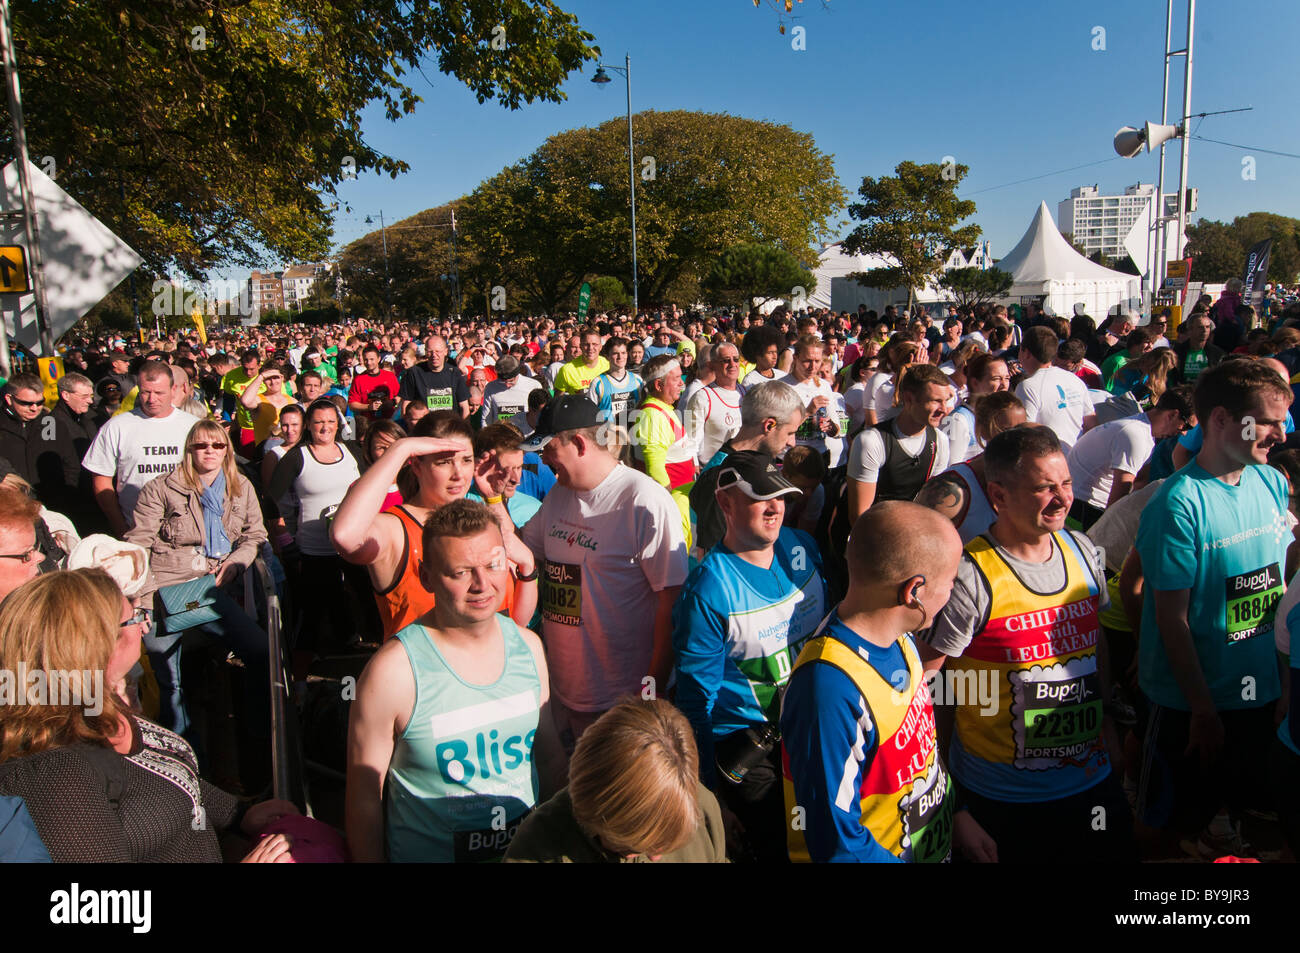 Runners on start line at Great South Run Portsmouth Stock Photo